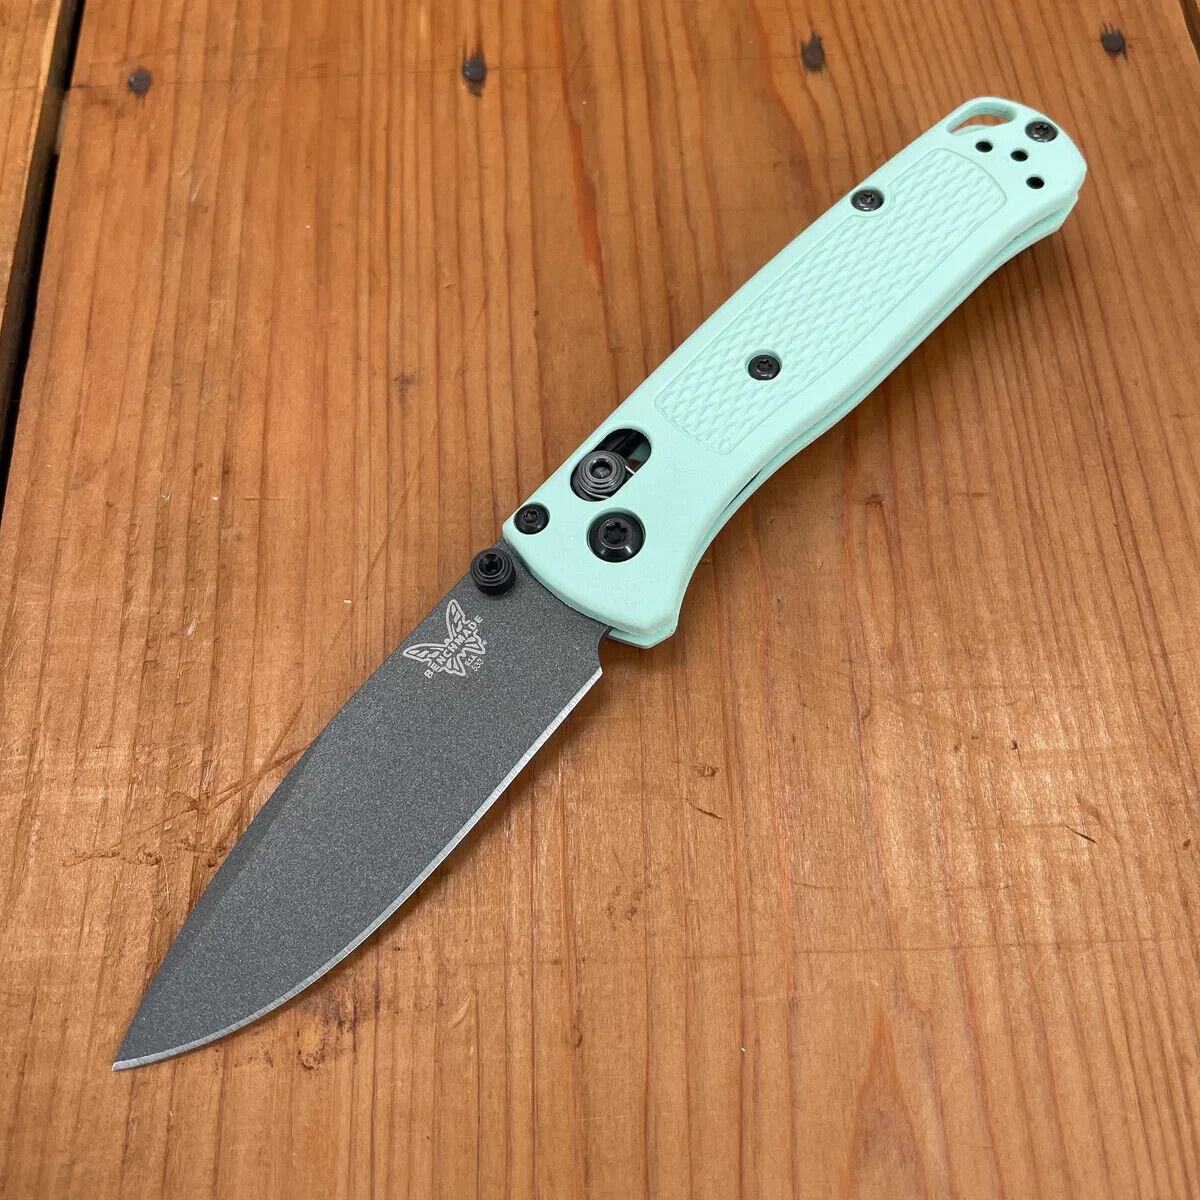 Benchmade Mini Bugout, Model: 533GY-06, Color: Sea Foam Grivory